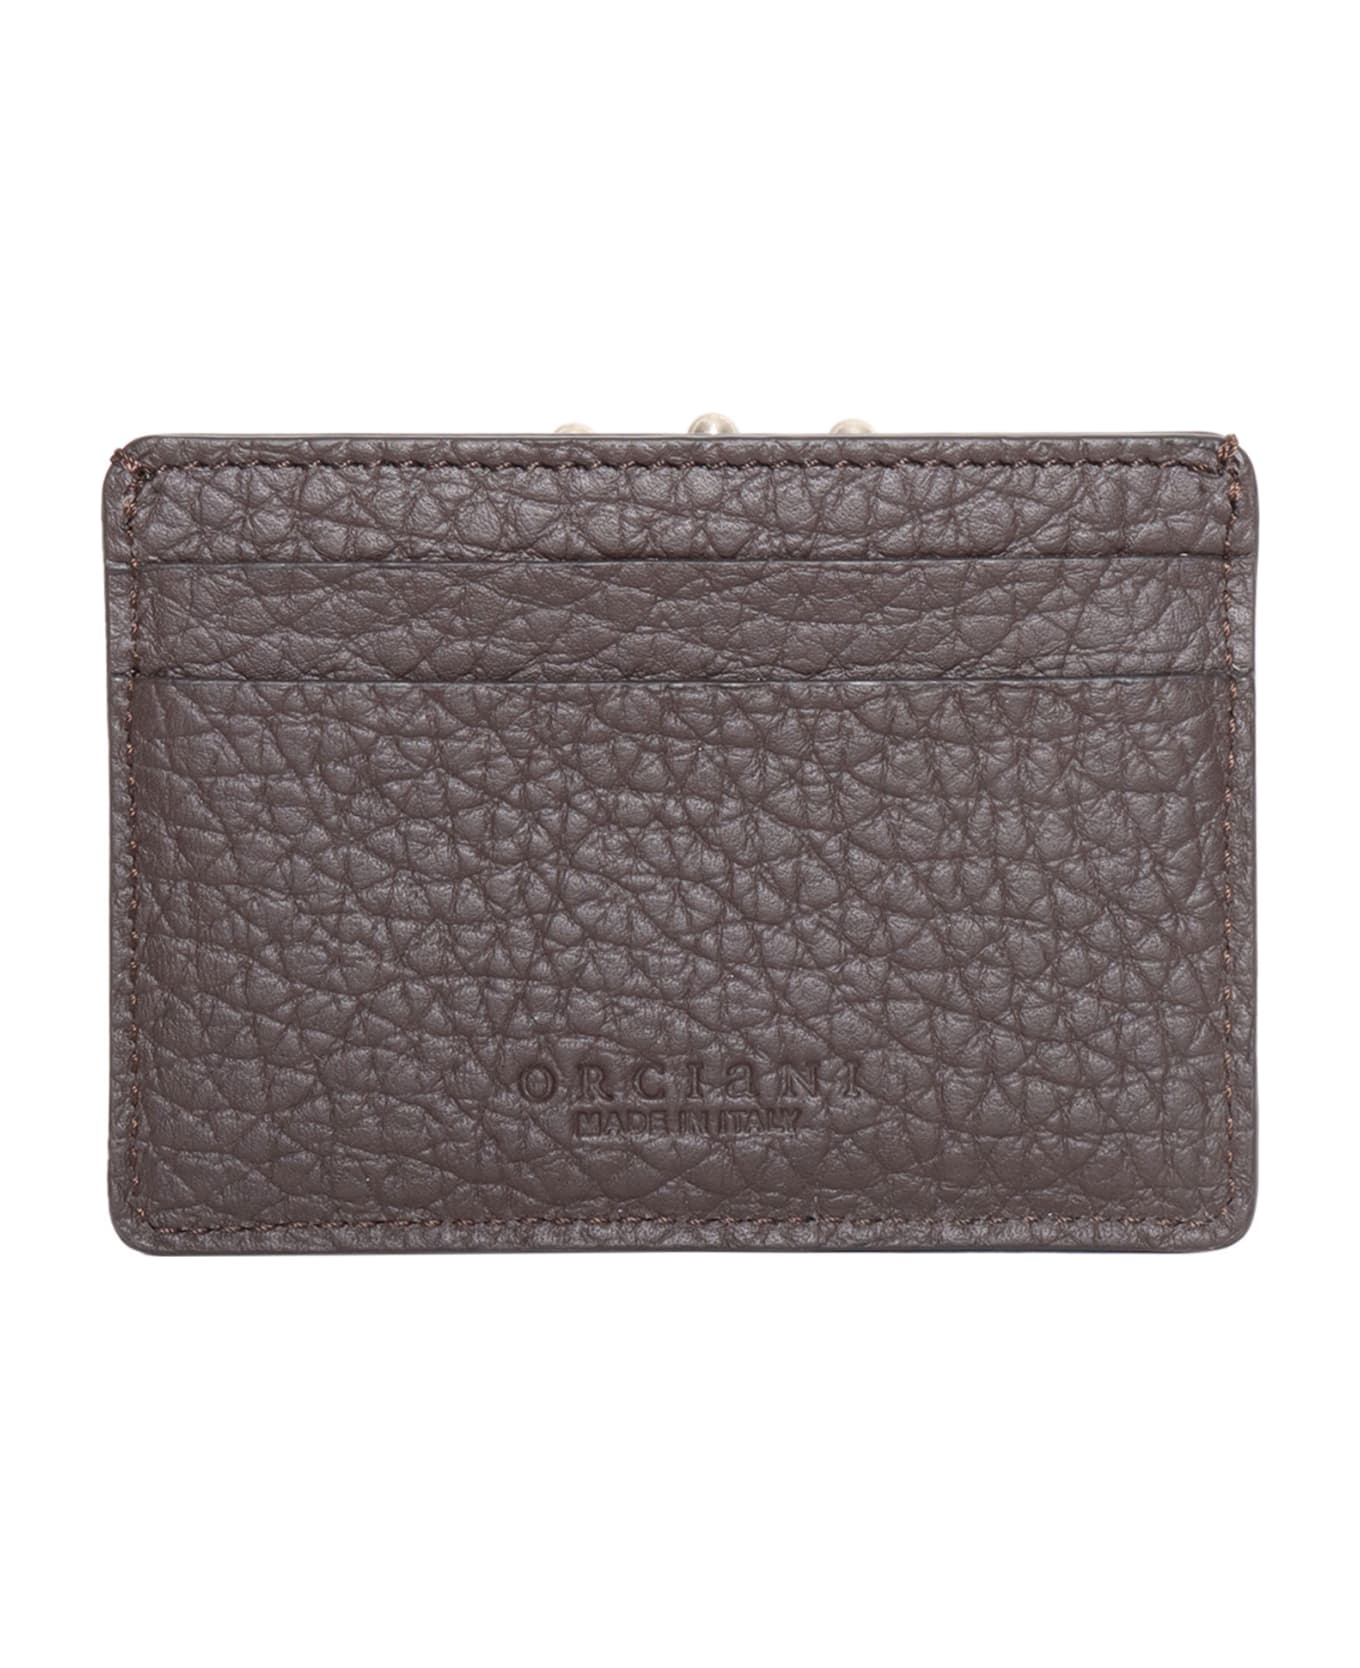 Orciani Soft Card Holder - BROWN 財布